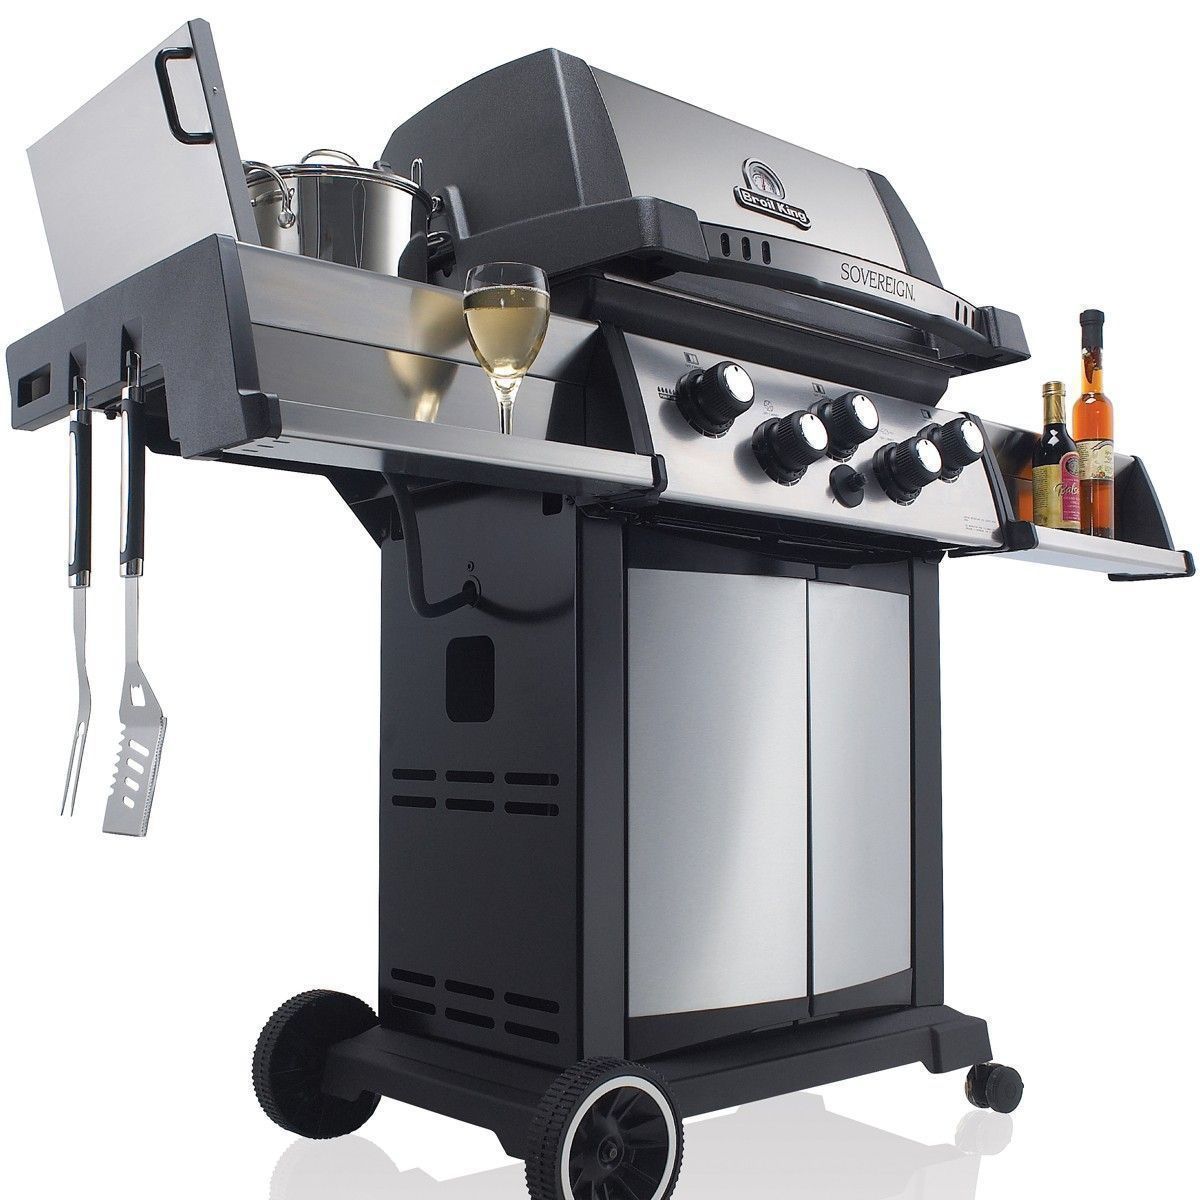 Grill Gazowy Broil King Sovereign 90 - Polgrill